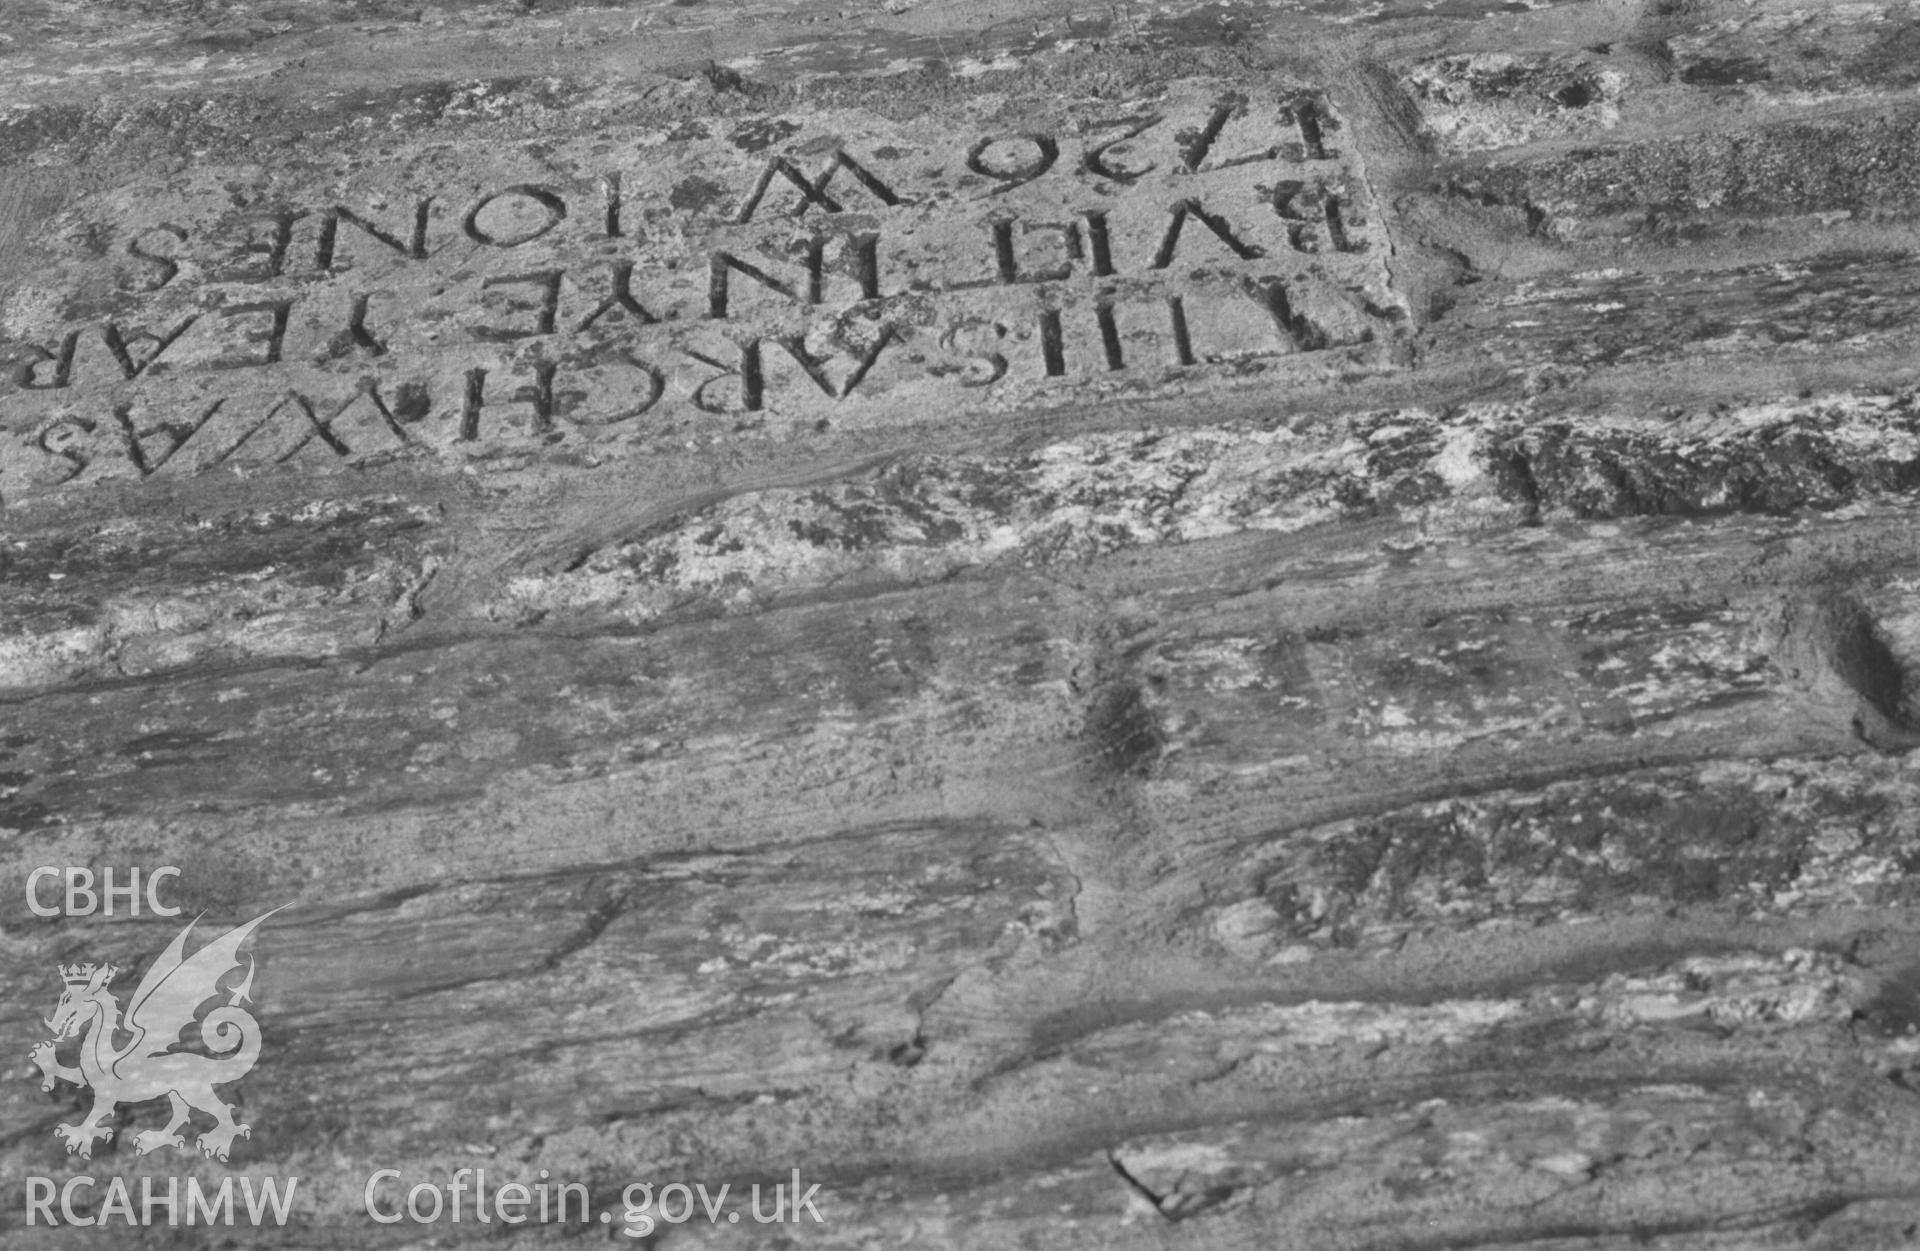 Digital copy of a black and white negative showing inscription on stone above cut-water on east side of Cardigan Bridge. Photographed by Arthur Chater on 30 August 1968. Looking west from Grid Reference SN 1778 4581.